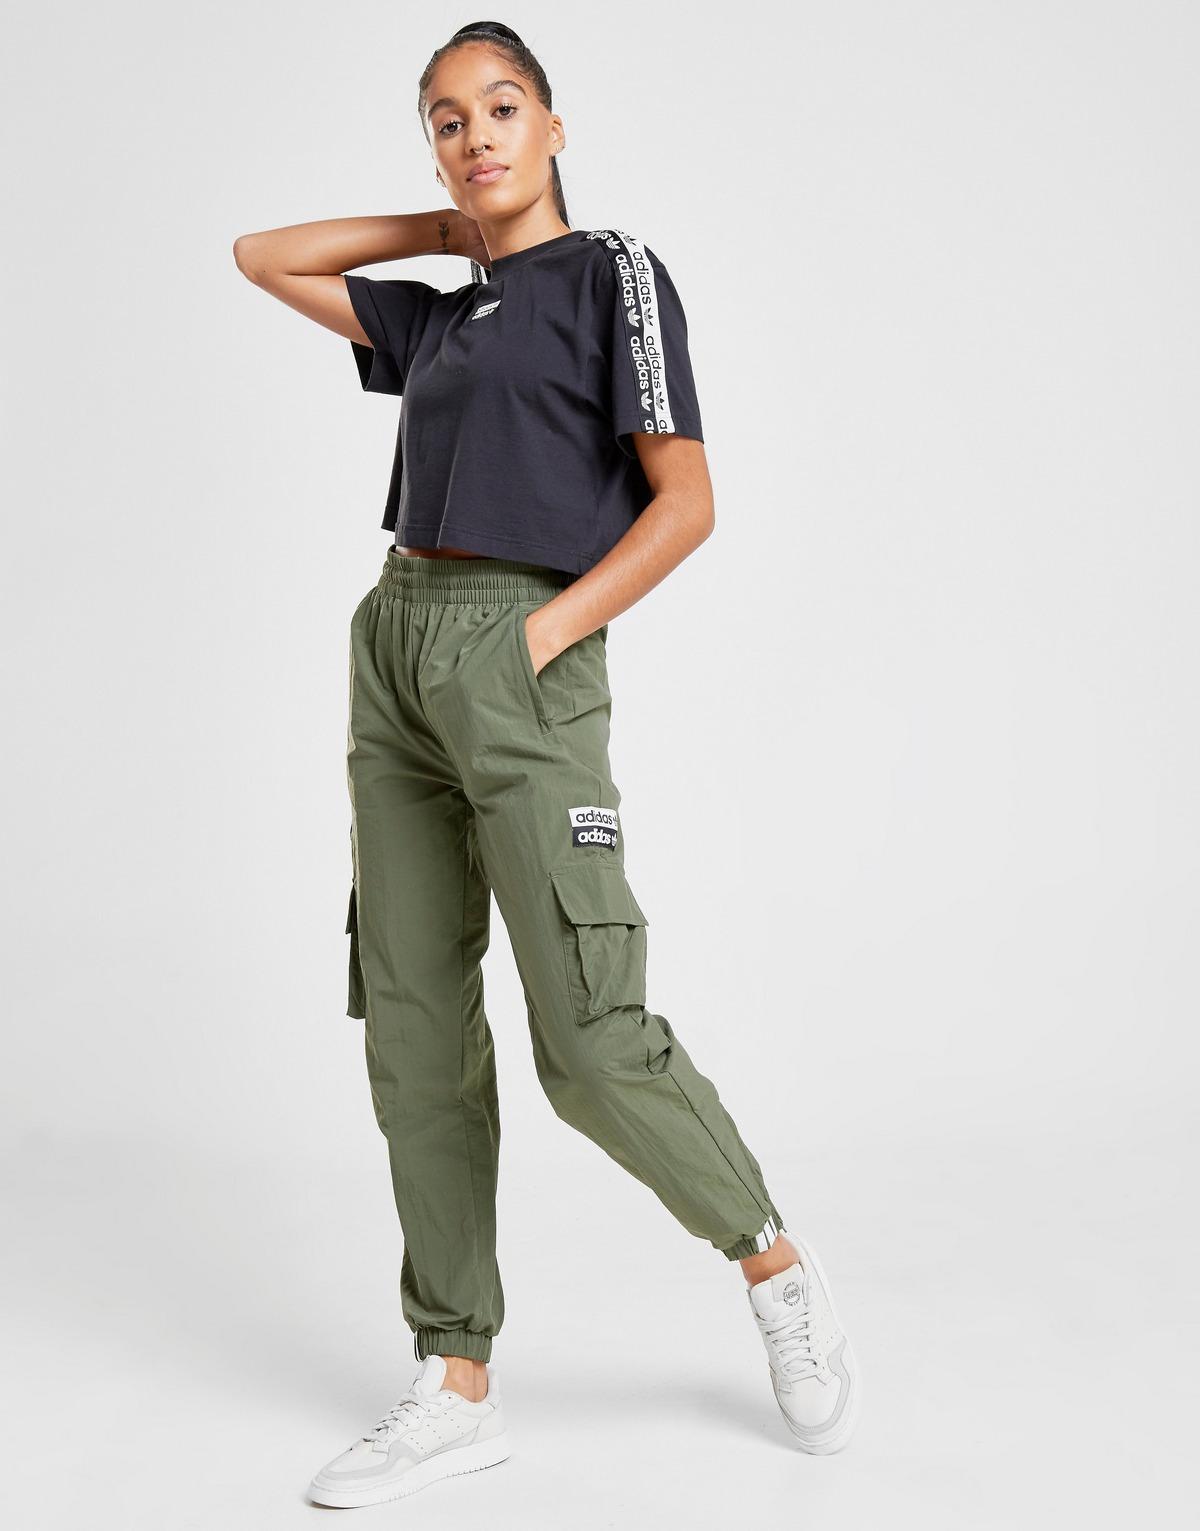 Adidas Cargo Track Pants Top Sellers, SAVE 35% - icarus.photos